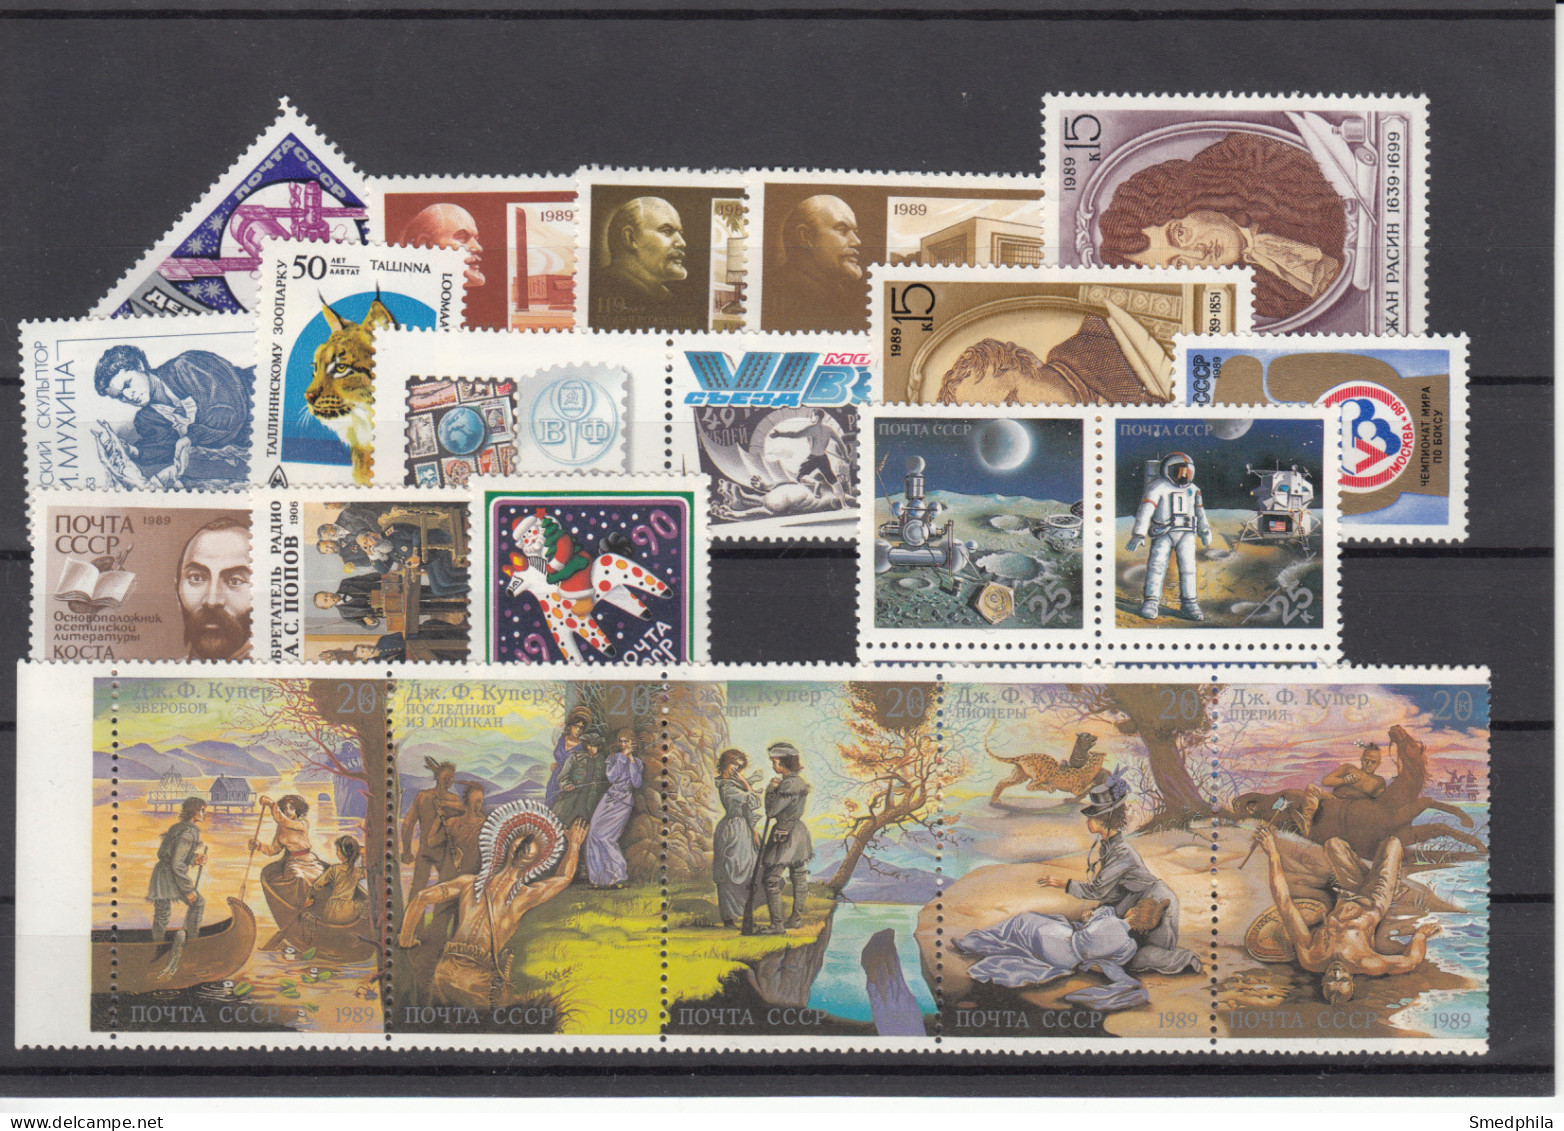 USSR 1989 - Looks Complete, Mixed Used/MNH ** - Años Completos